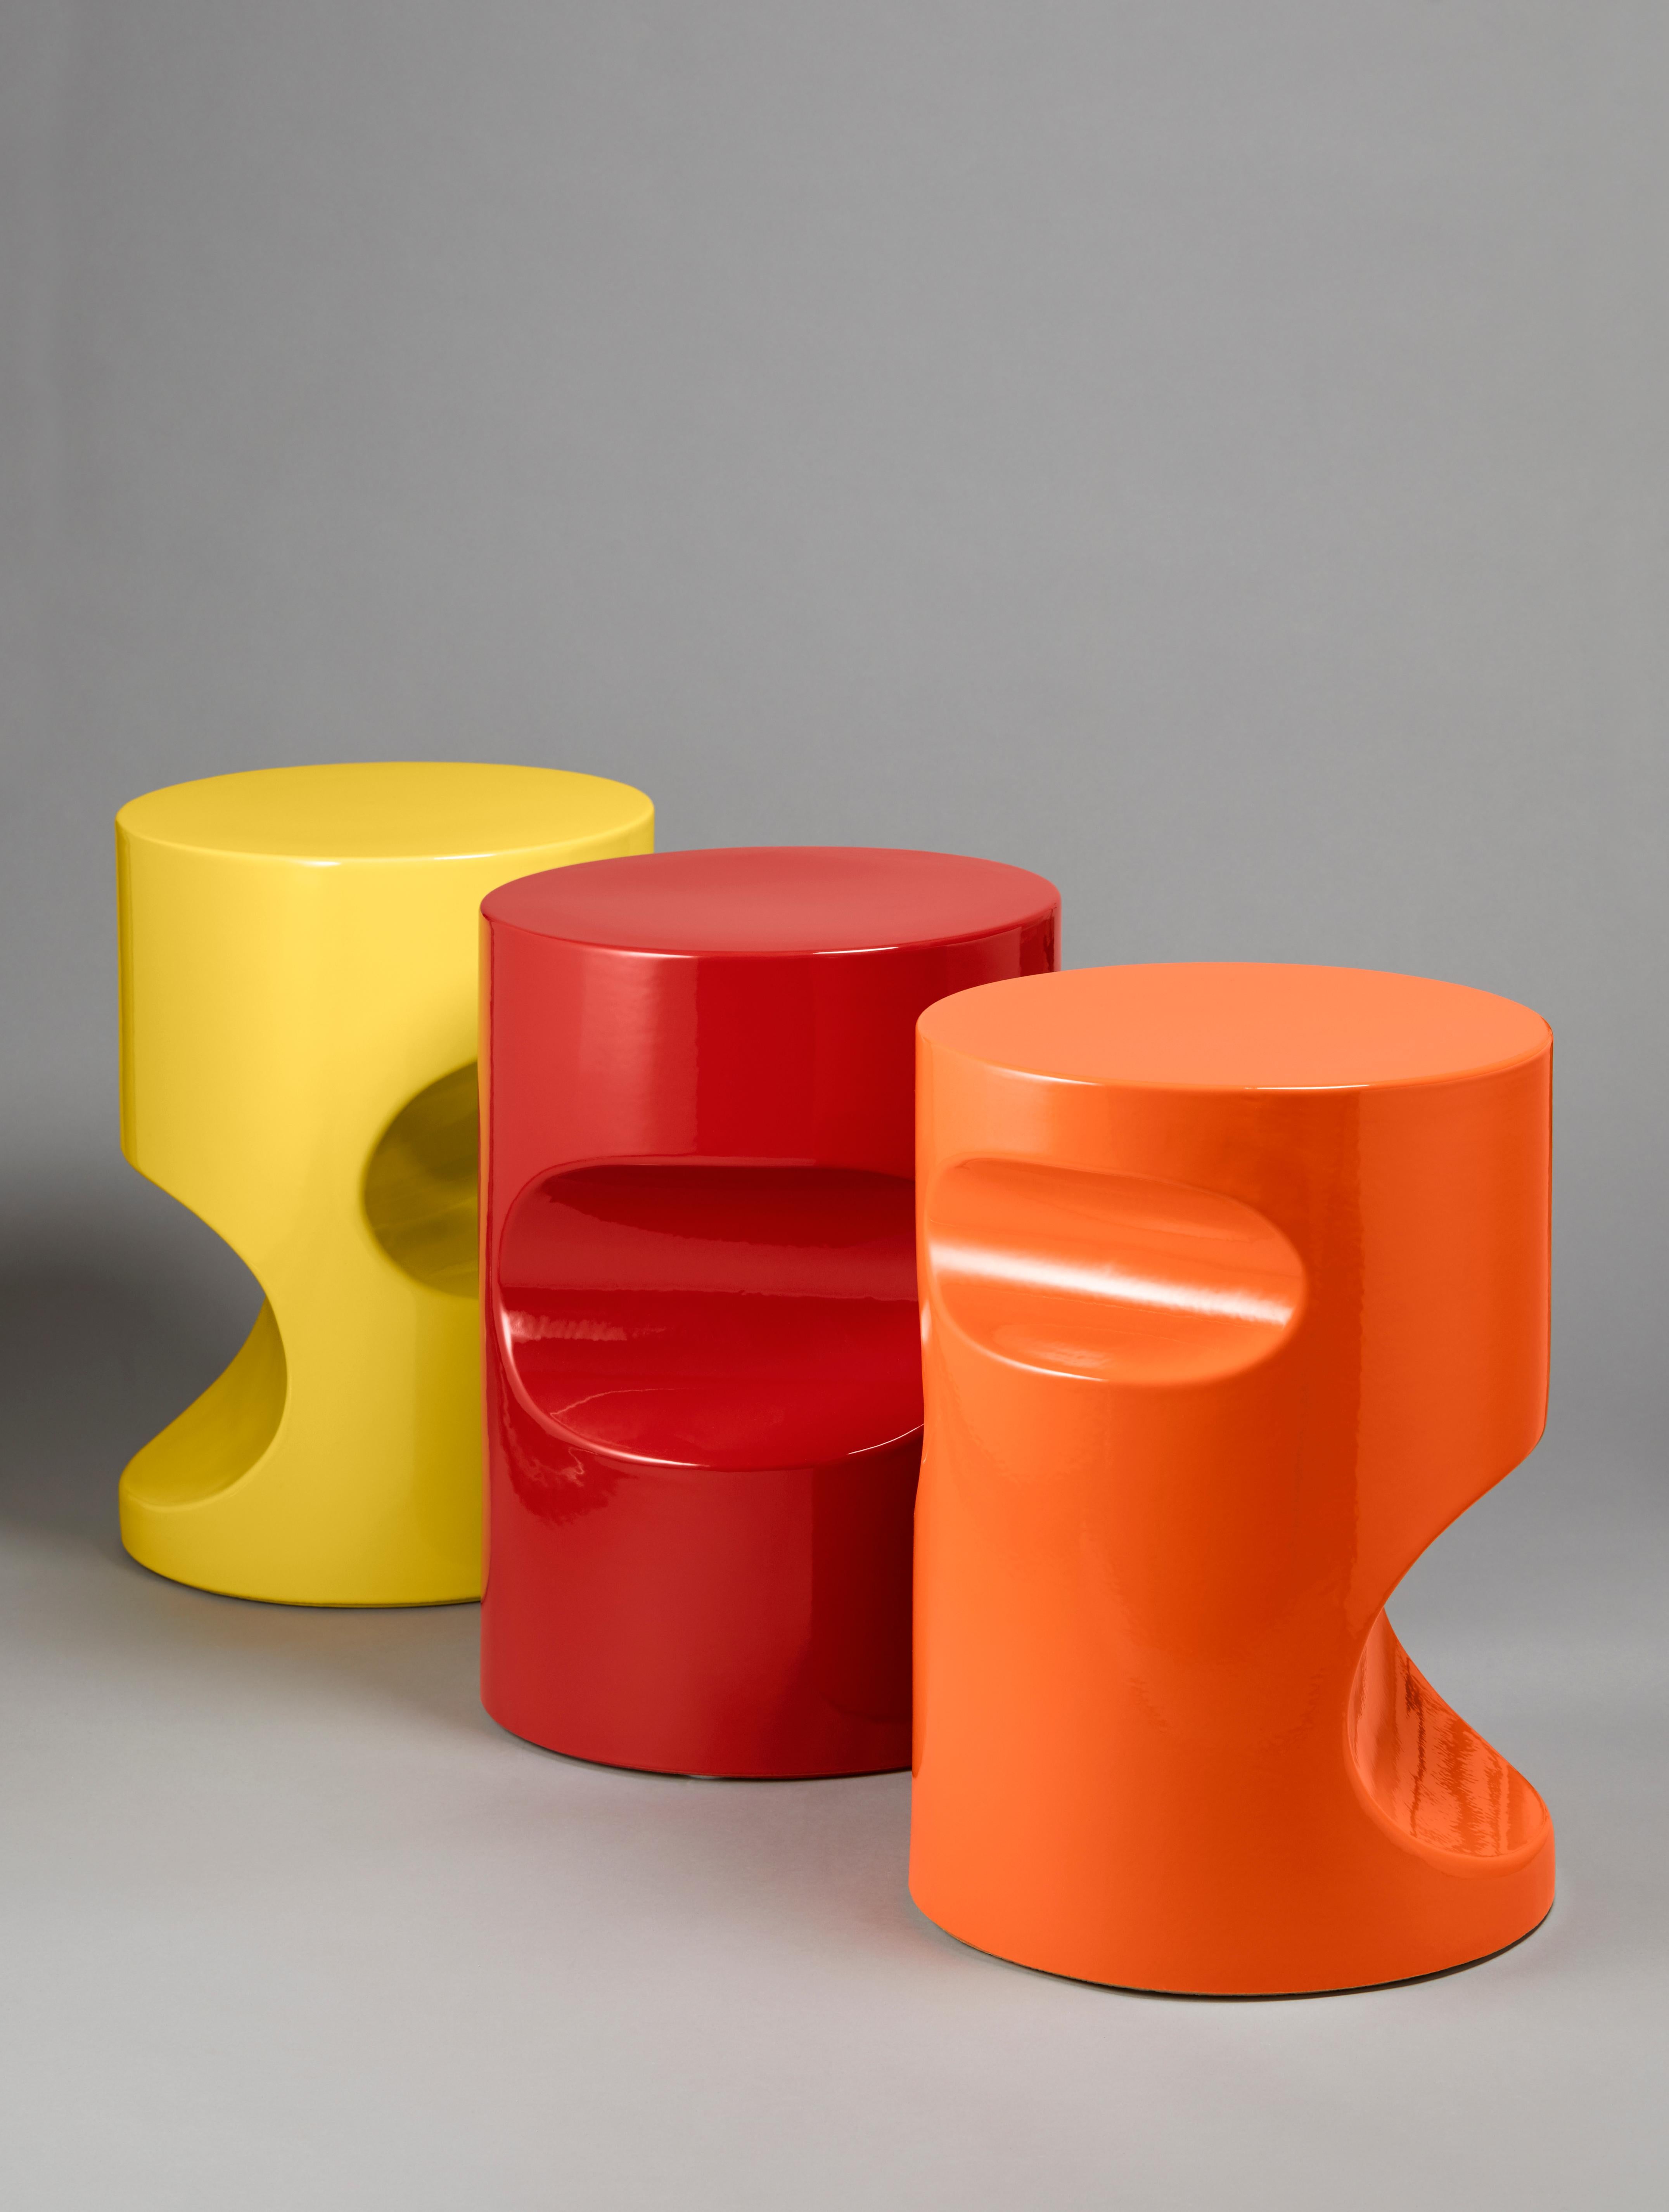 Fétiche ceramic stool designed by Hervé Langlais for Galerie Negropontes. Available in different colors.

French designer Herve Langlais created a series of stools/pouf named after his Fetiche table lamp. Fetiche pouf are in ceramic with different